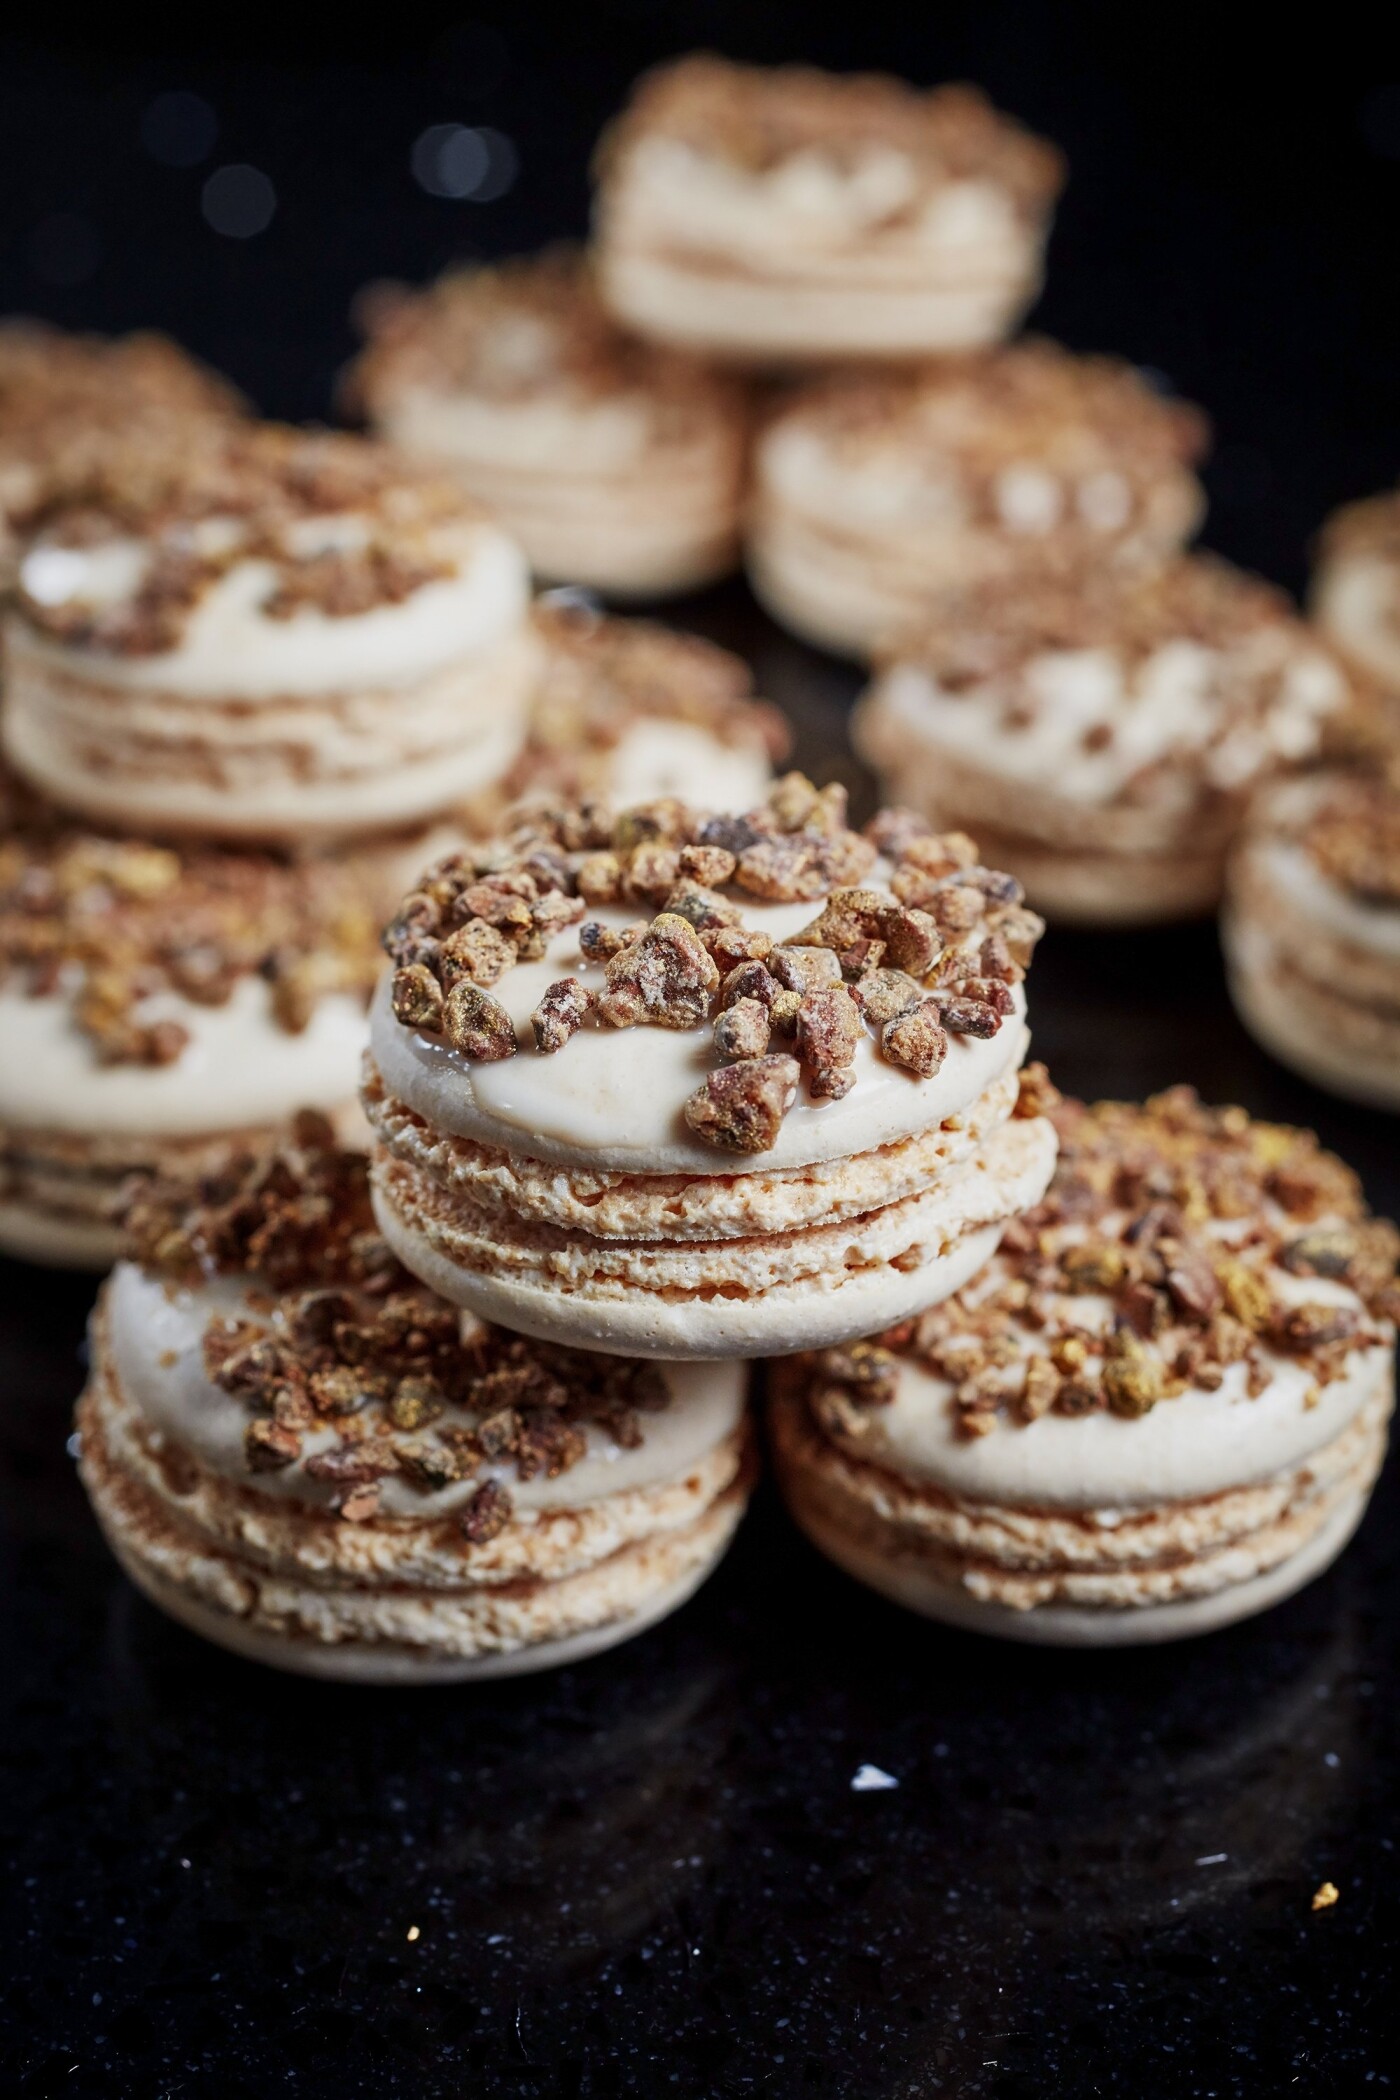 Mince pie flavoured macaroons - now there's Christmas in a mouthful!<br />
Stunning pastry chef, Andy Blas created these beauties<br />
<br />
Magazine: Seasoned by Chefs @seasonedbychefs<br />
Photographer: @jodihindsphoto